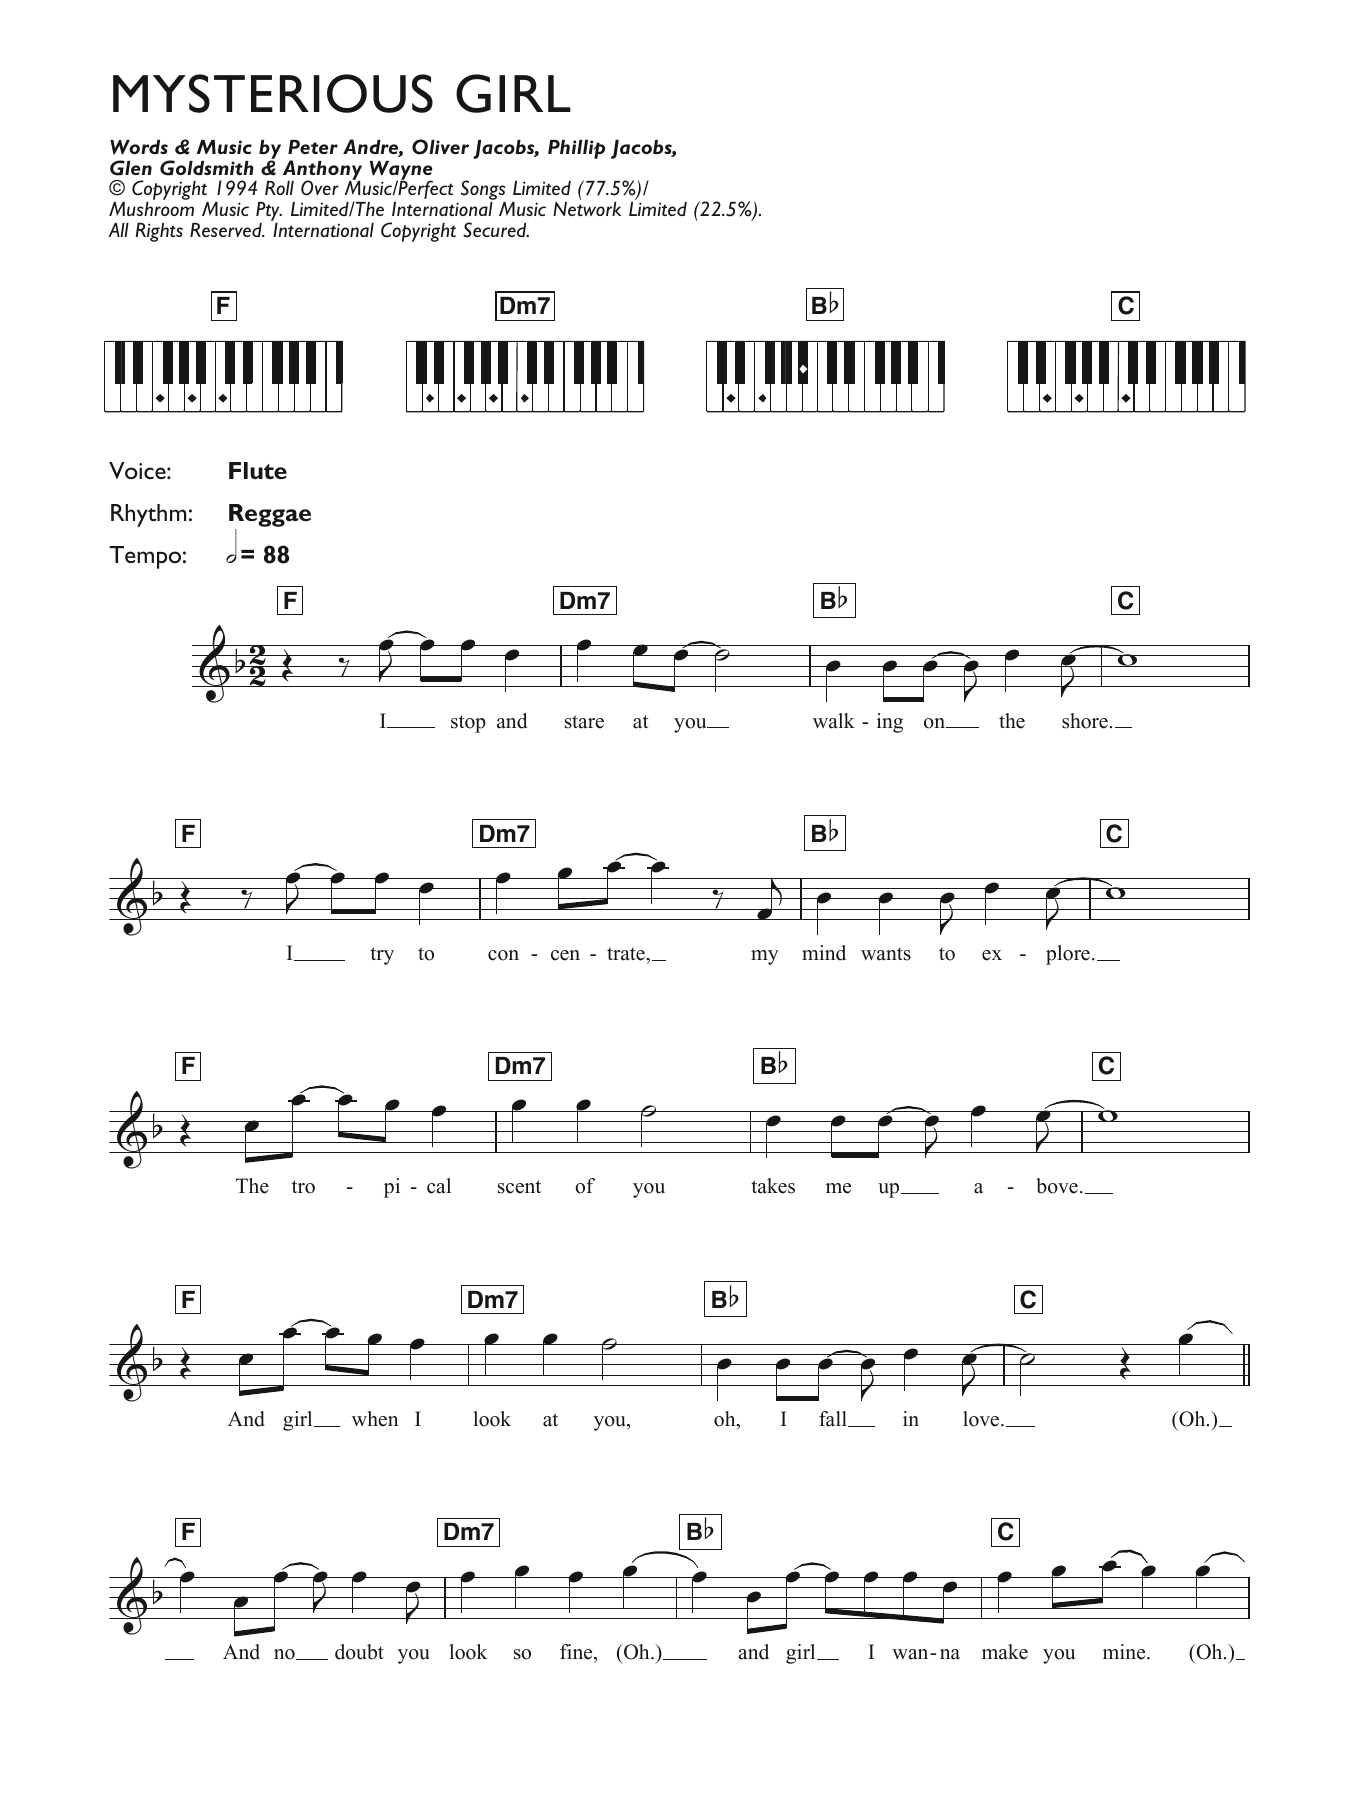 Download Peter Andre Mysterious Girl Sheet Music